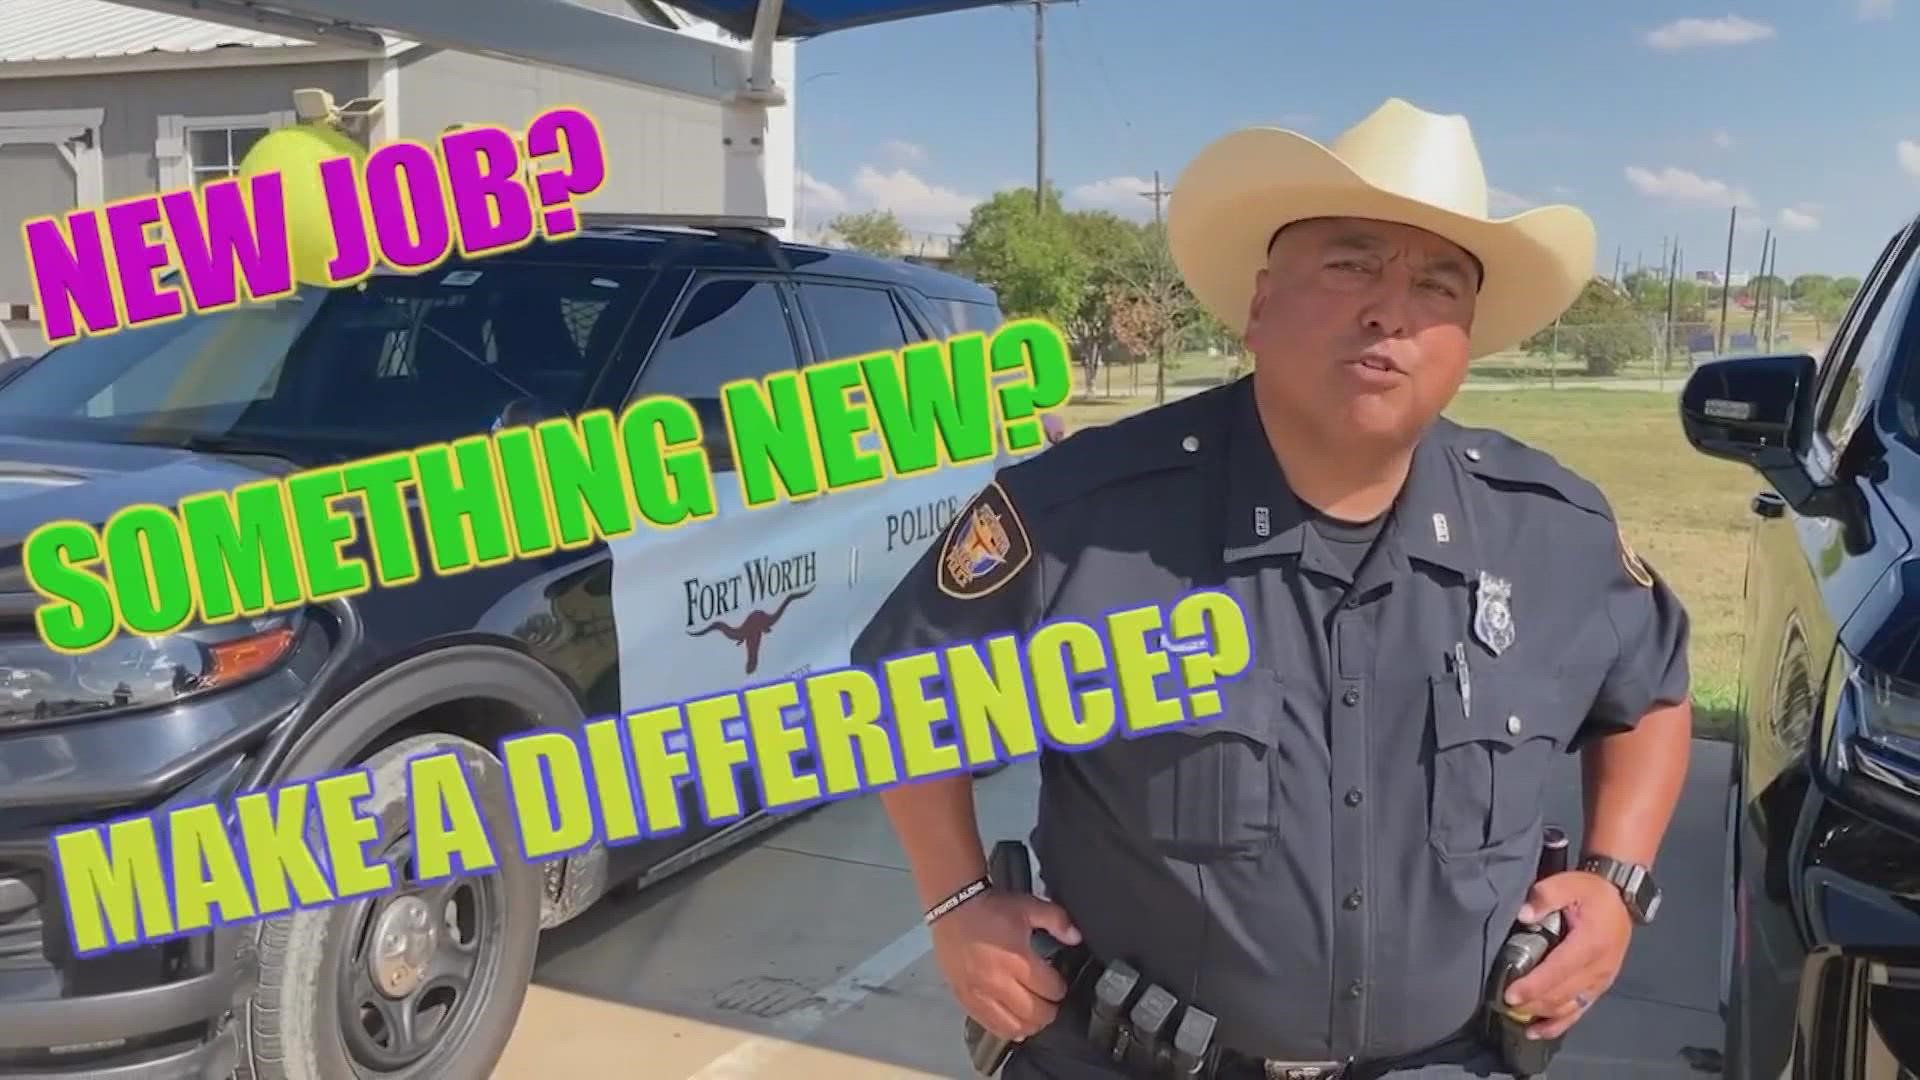 Officer Big B and FWPD took on the classic style of car sales commercials to interest potential recruits.